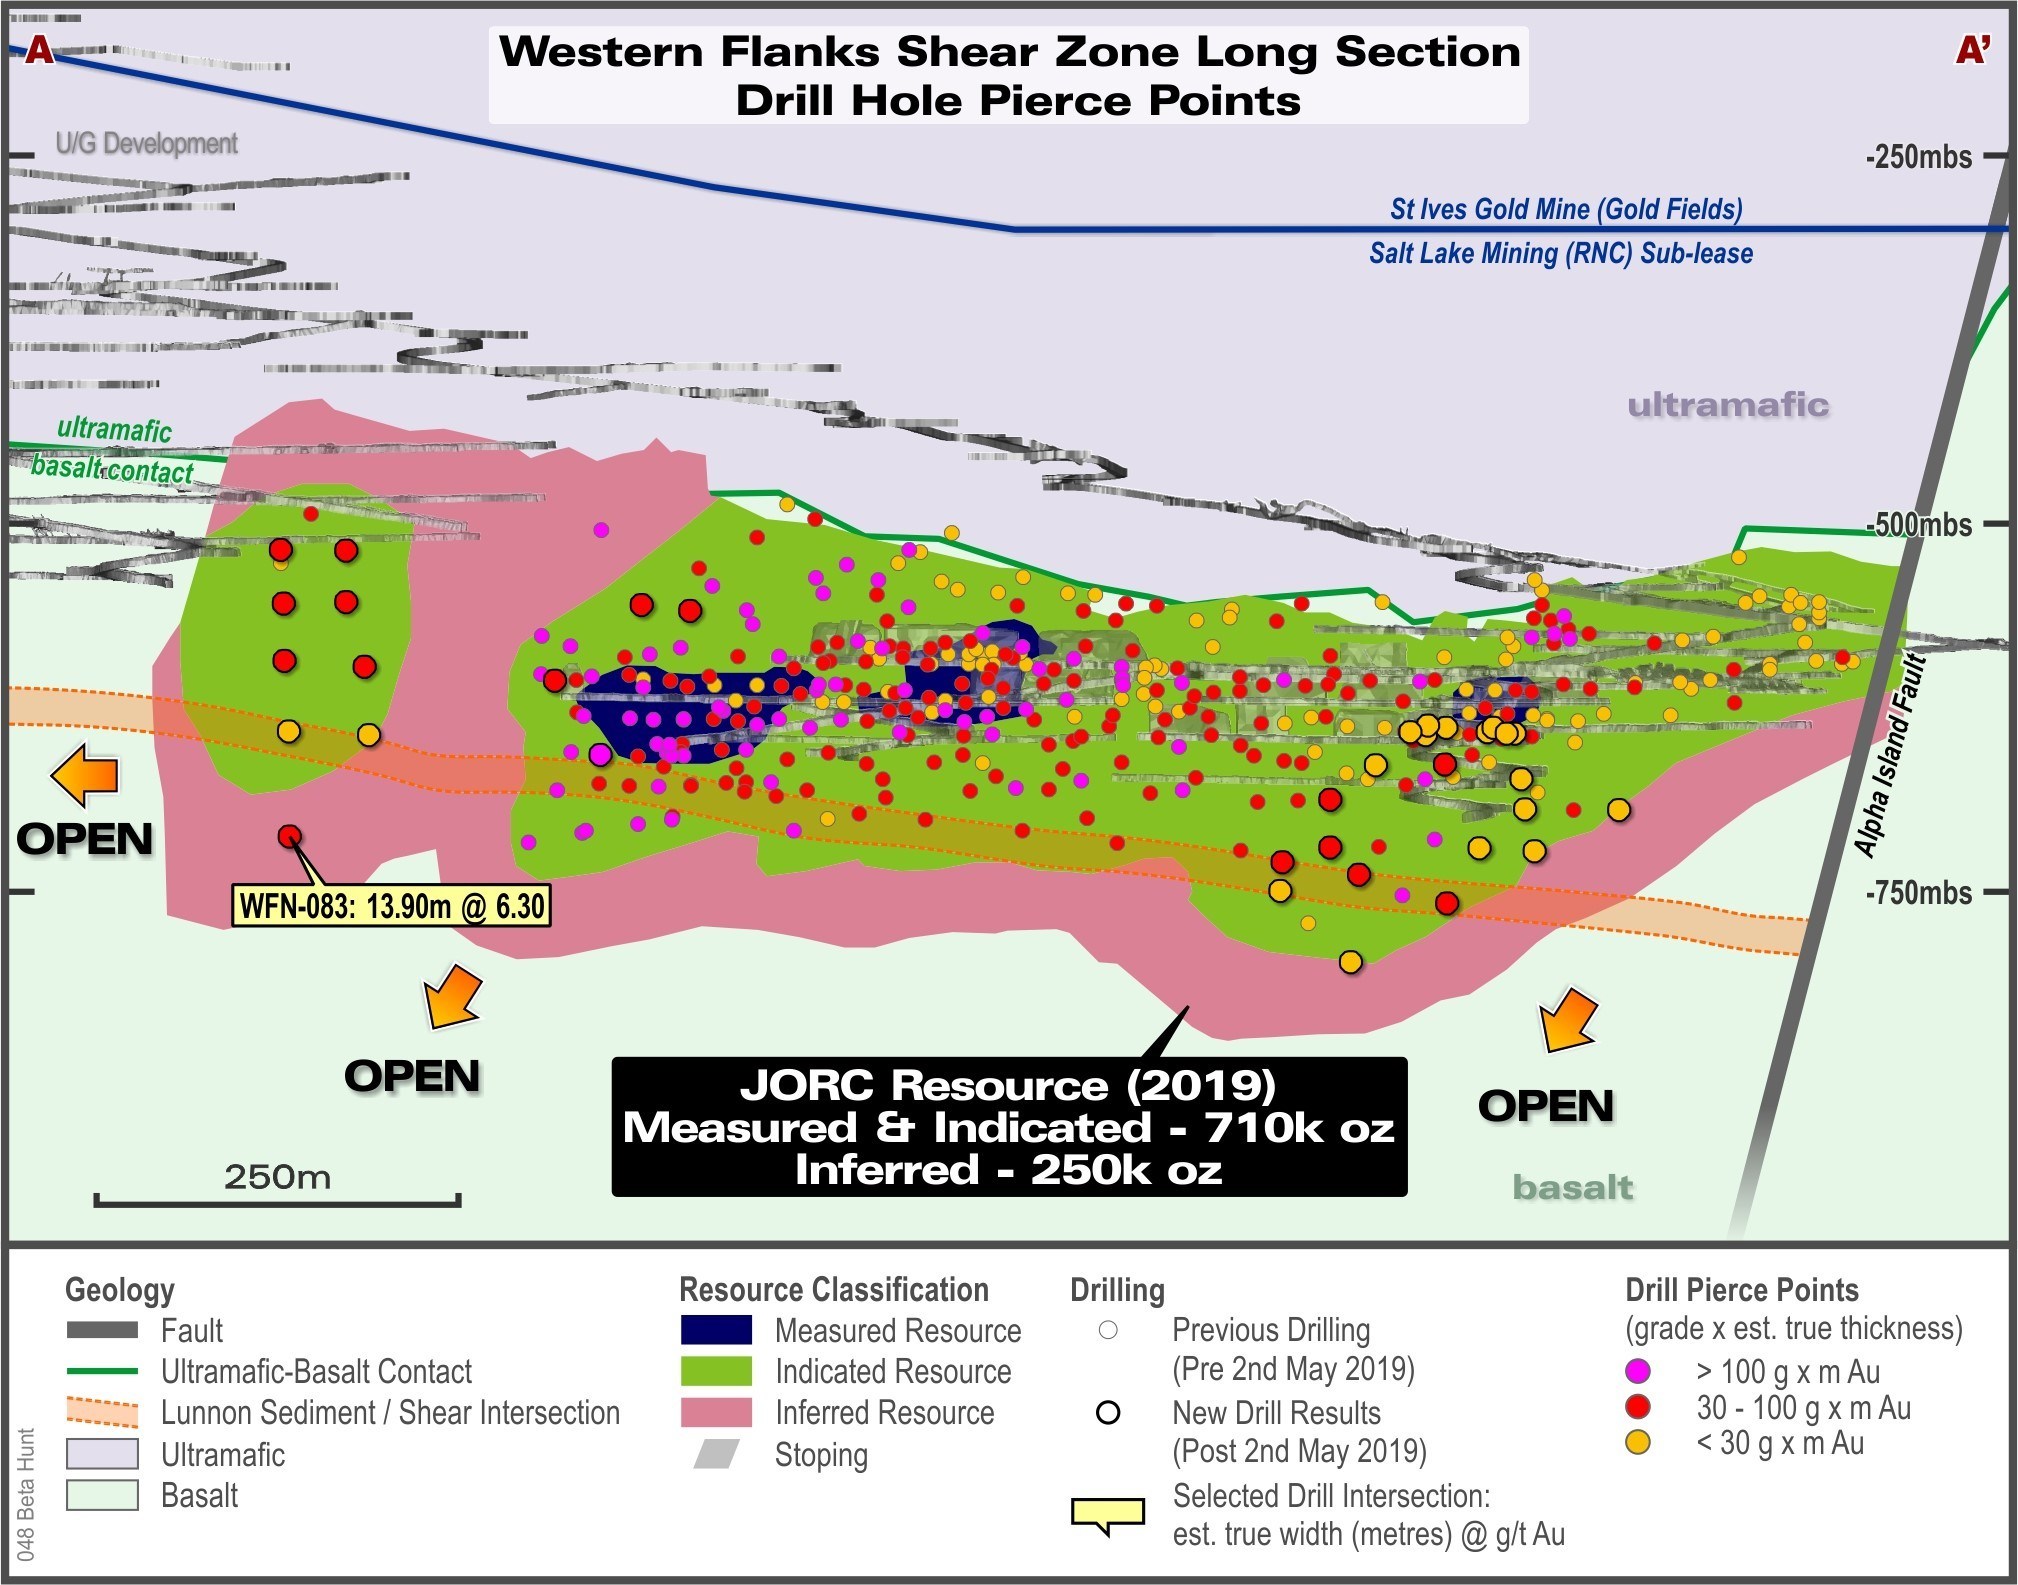 Rnc Minerals Announces 390 Increase In Measured And Indicated Gold Mineral Resource For The Western Flanks Zone At Beta Hunt To 710 Koz Jun 27 19